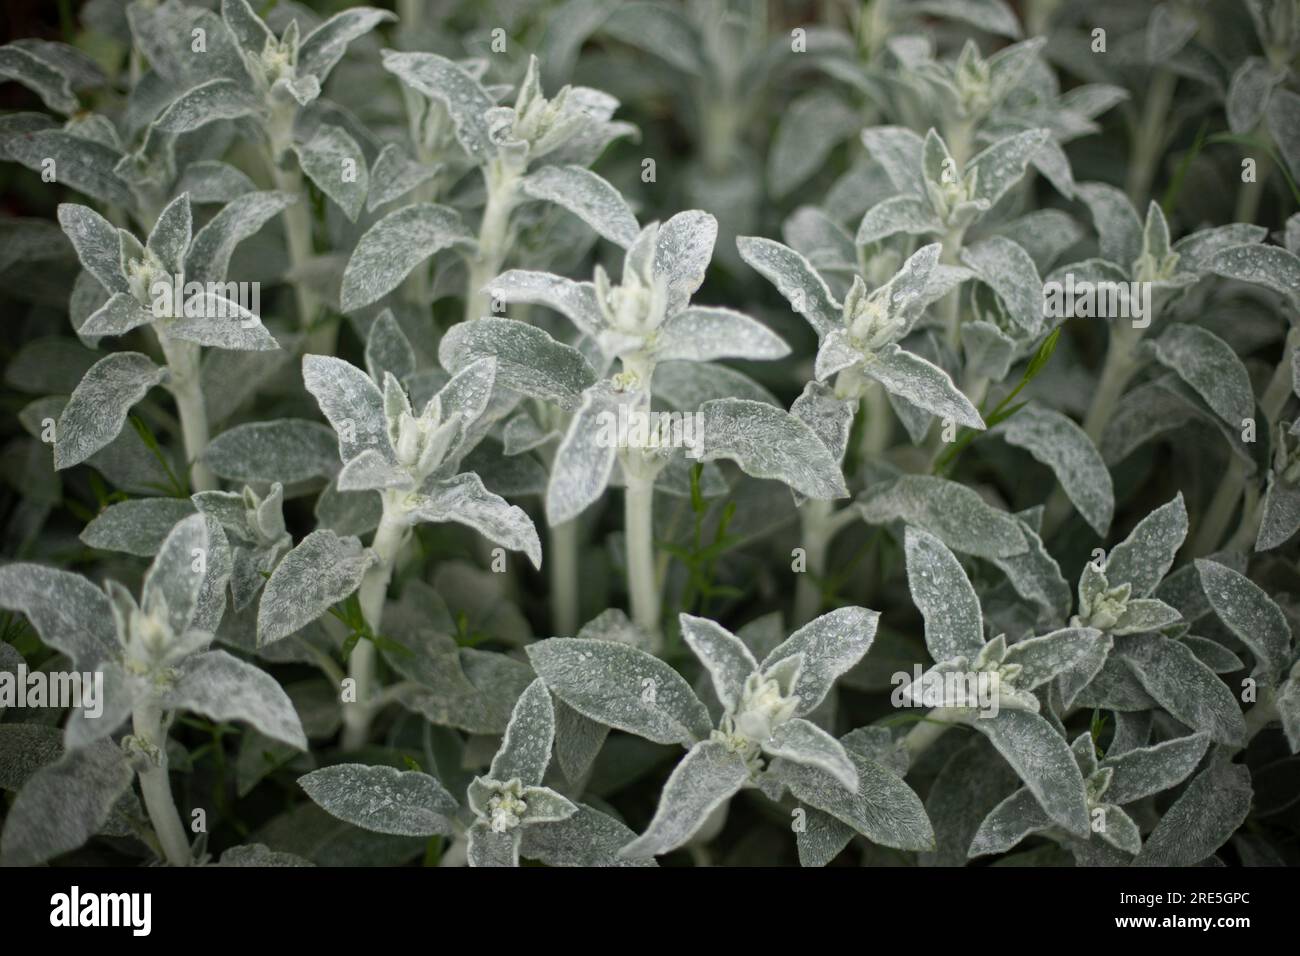 Green stems of plant. Garden plant without flowers. Texture of greenery  Stock Photo - Alamy